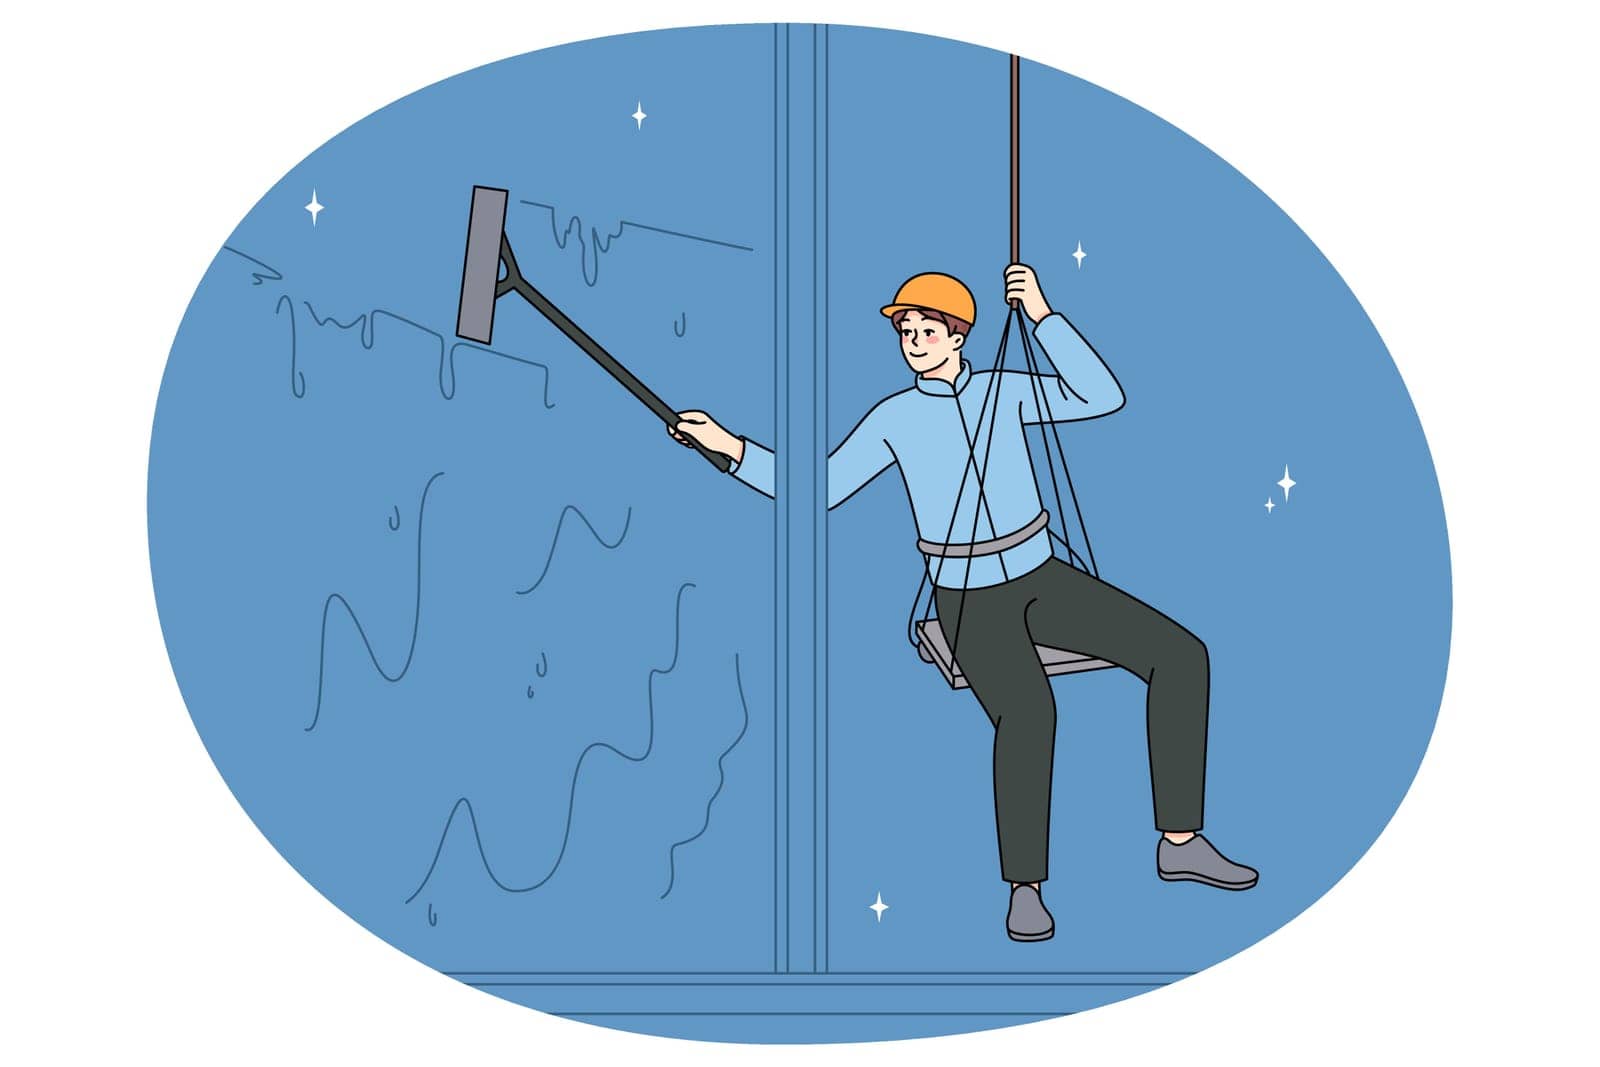 Male worker on safety ropes cleaning windows of office building. Man alpinist or industrial climber work on cables, climb onto surface. Occupation and profession. Vector illustration.